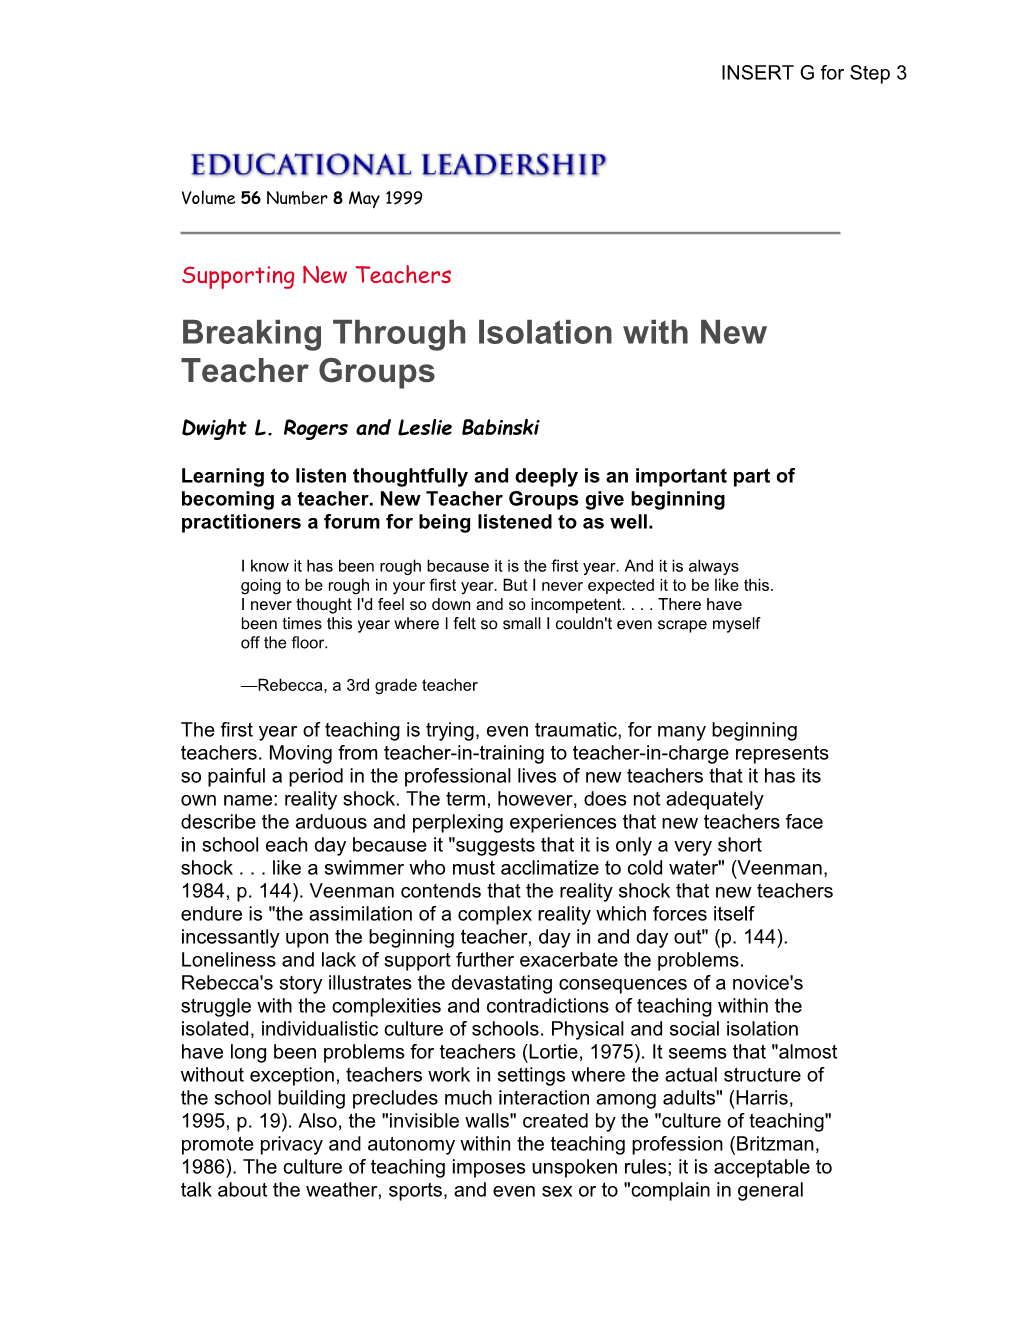 Breaking Through Isolation with New Teacher Groups